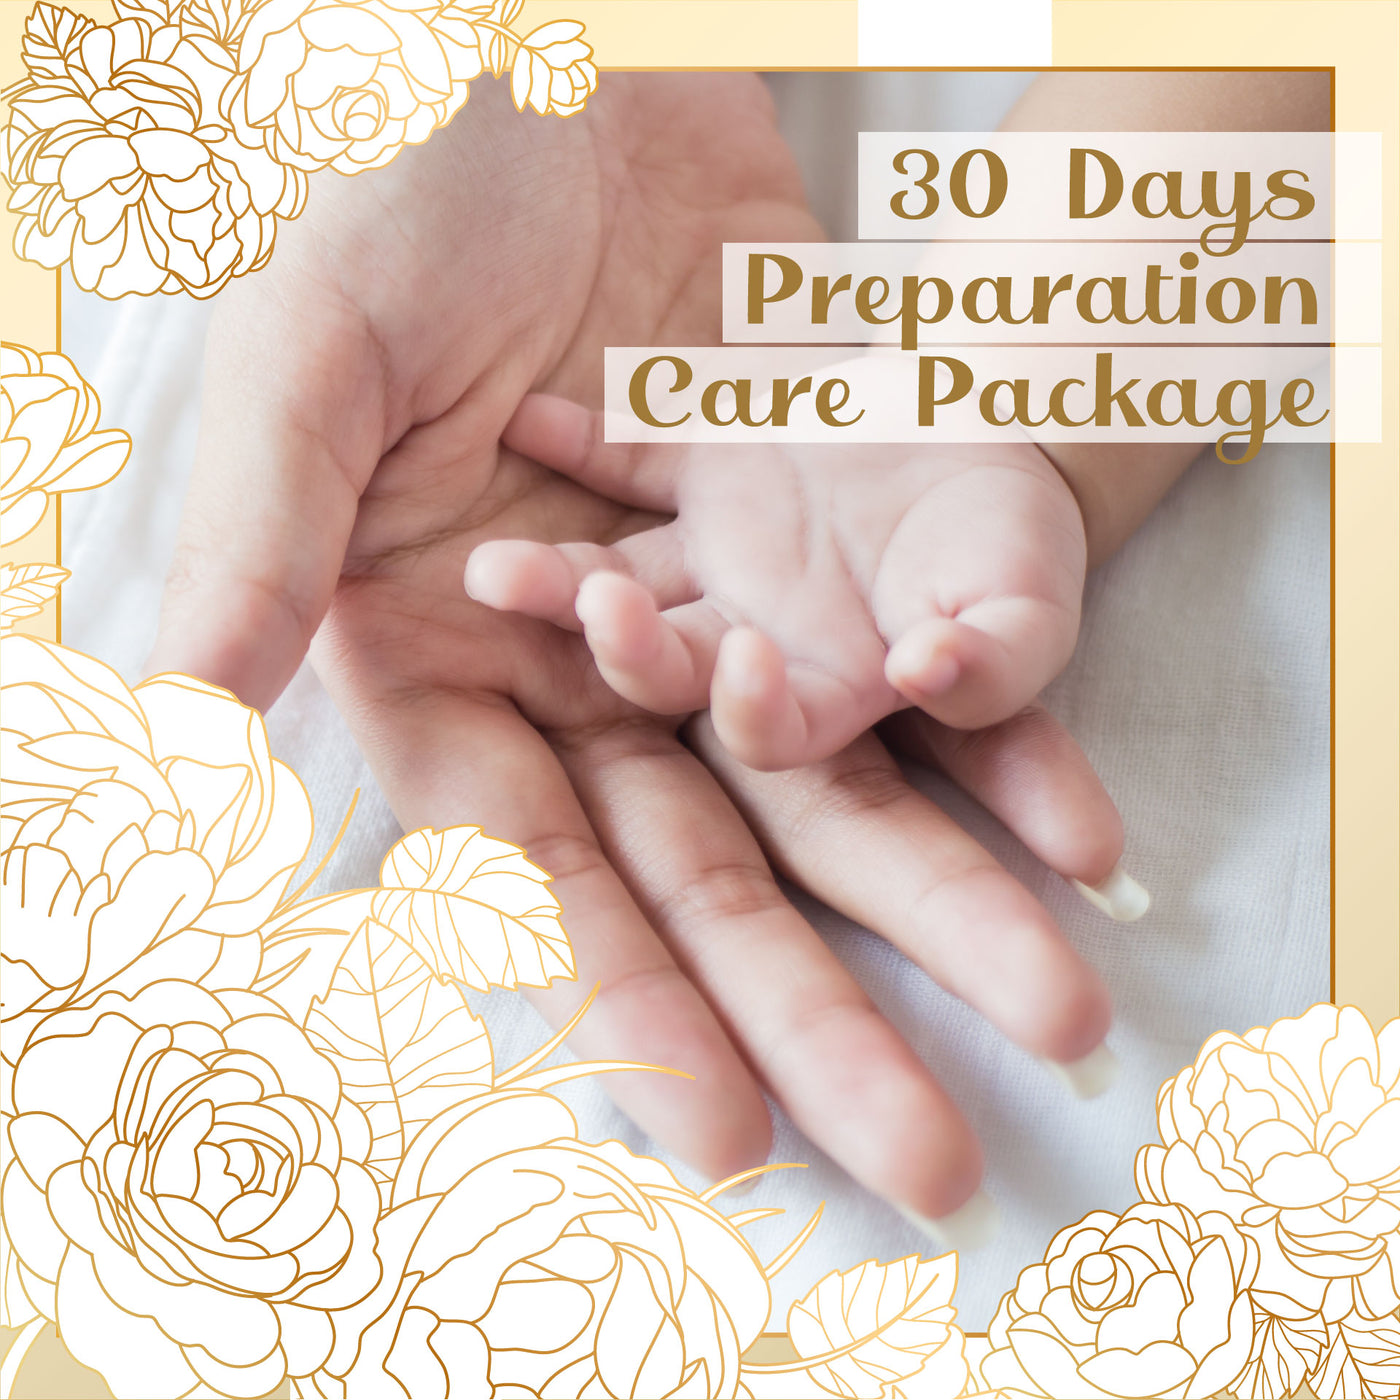 30 Days Preparation Care Package